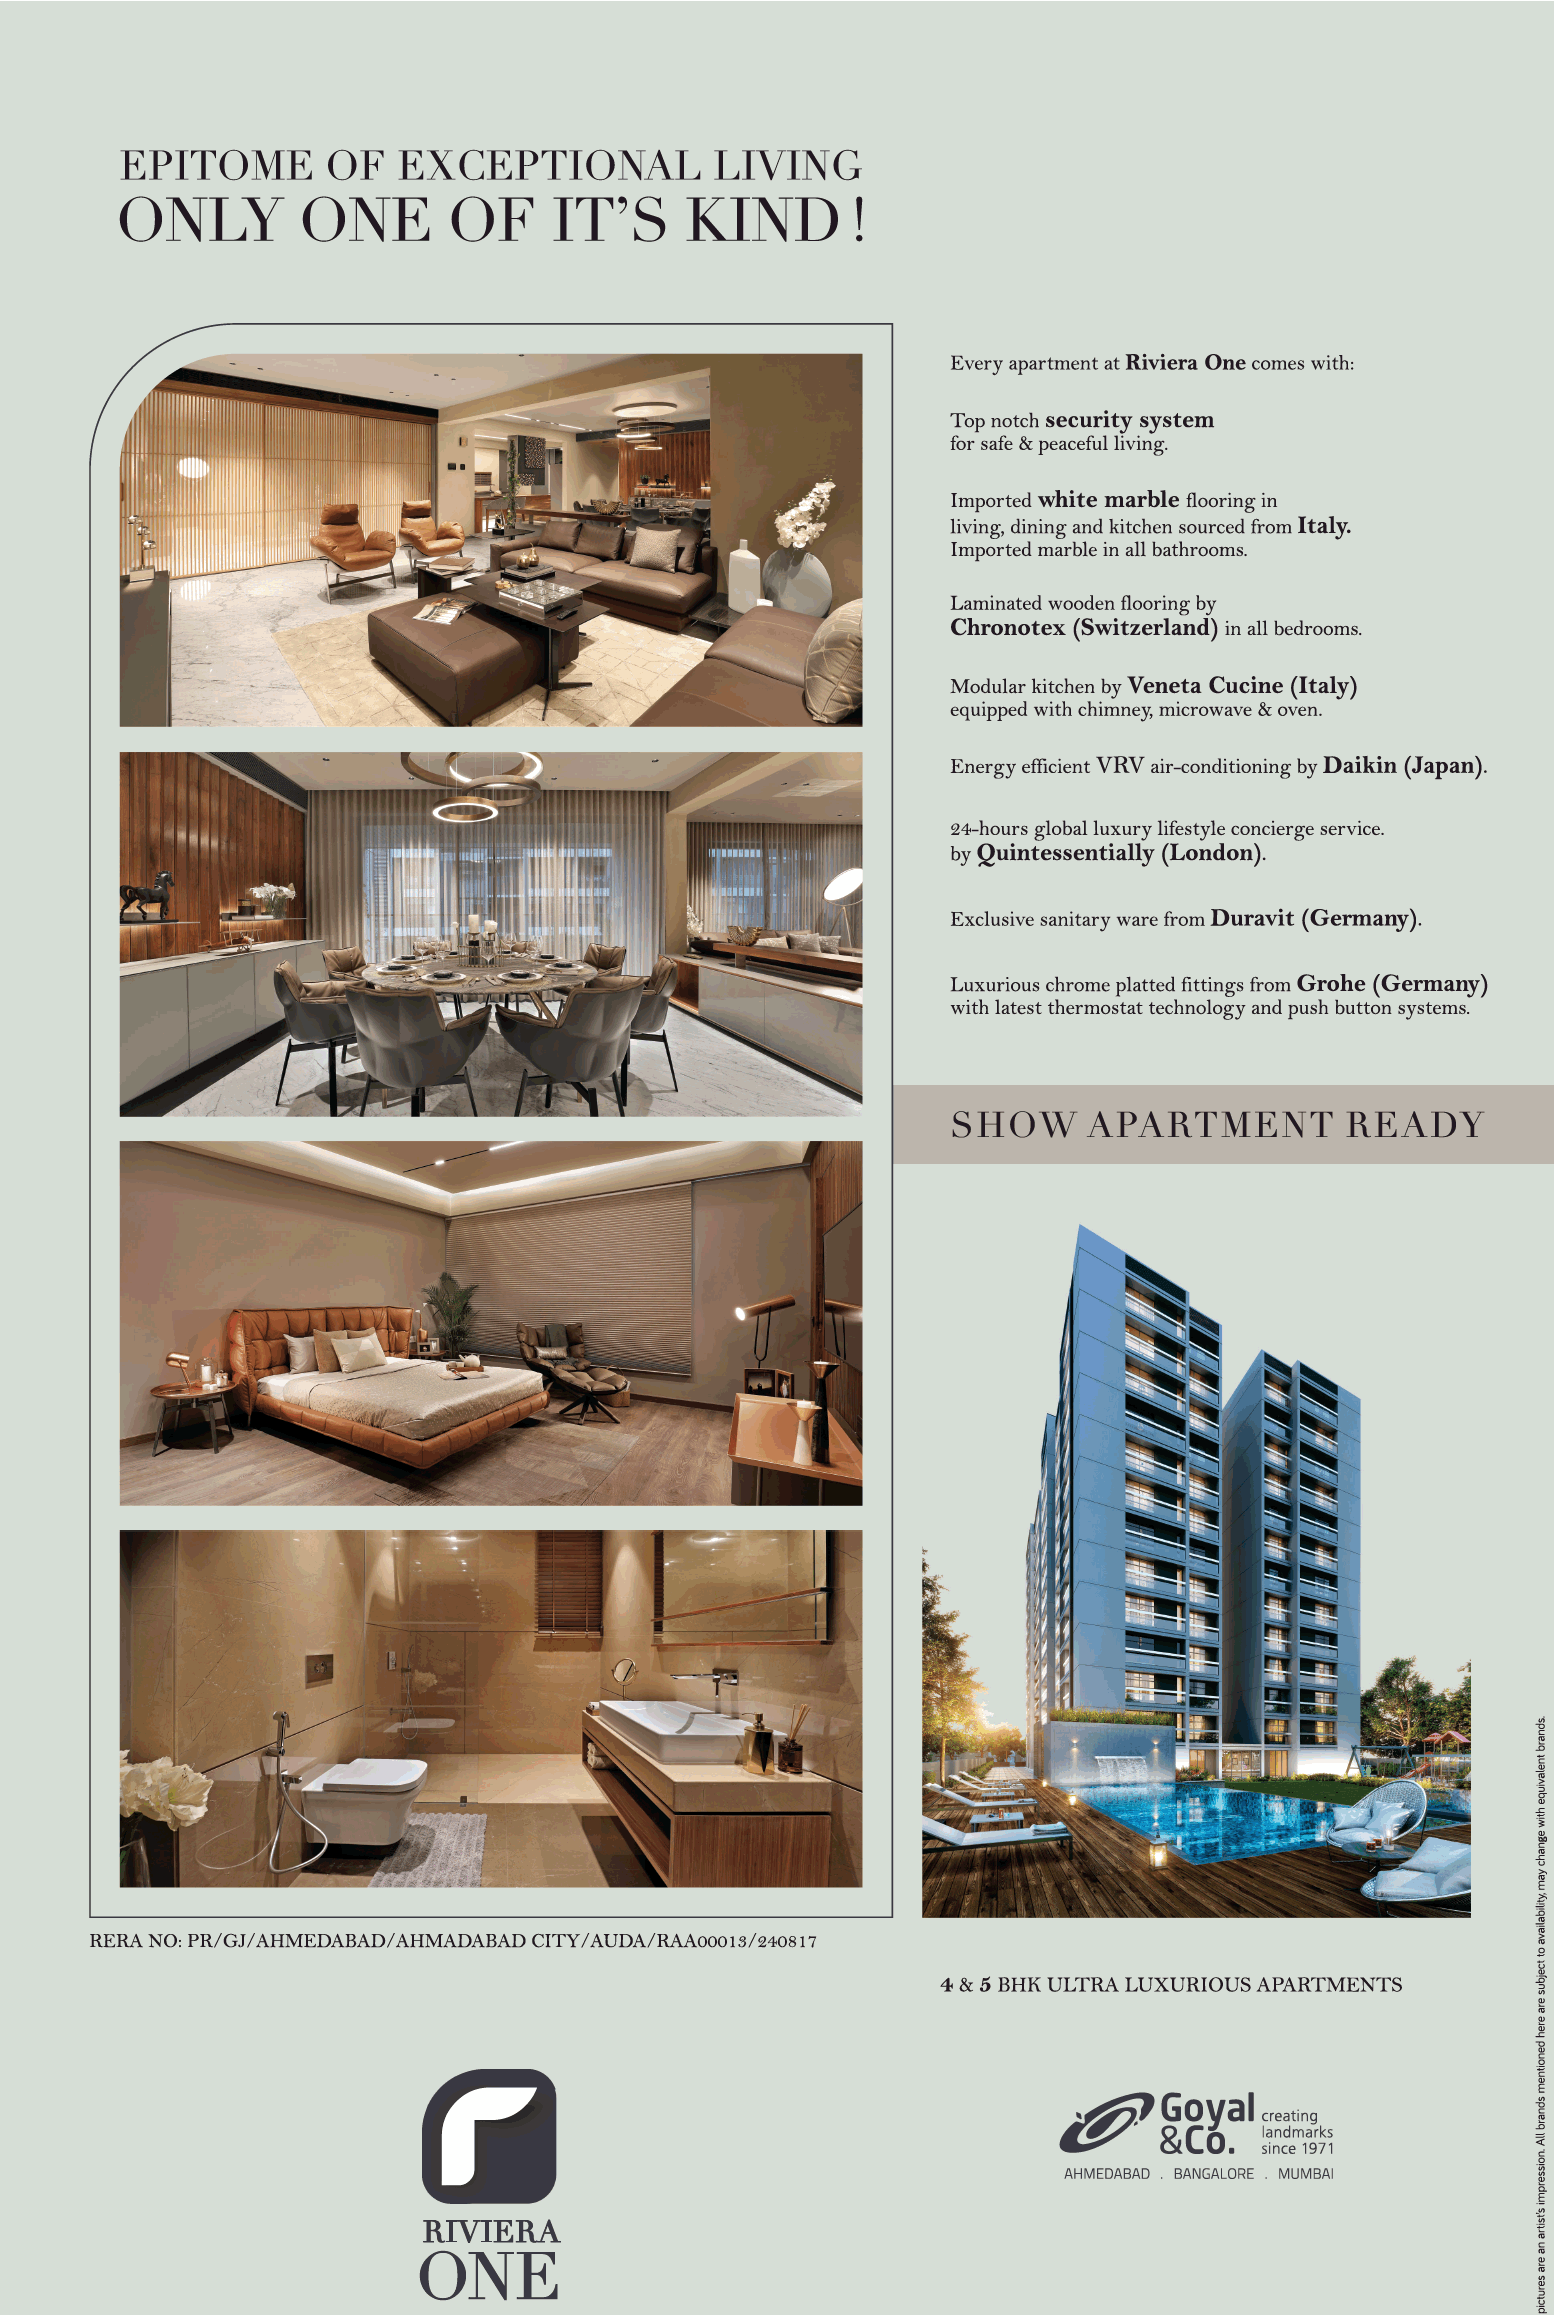 Presenting 4 & 5 bhk ultra luxurious apartments at Goyal Riviera One in Ahmedabad Update